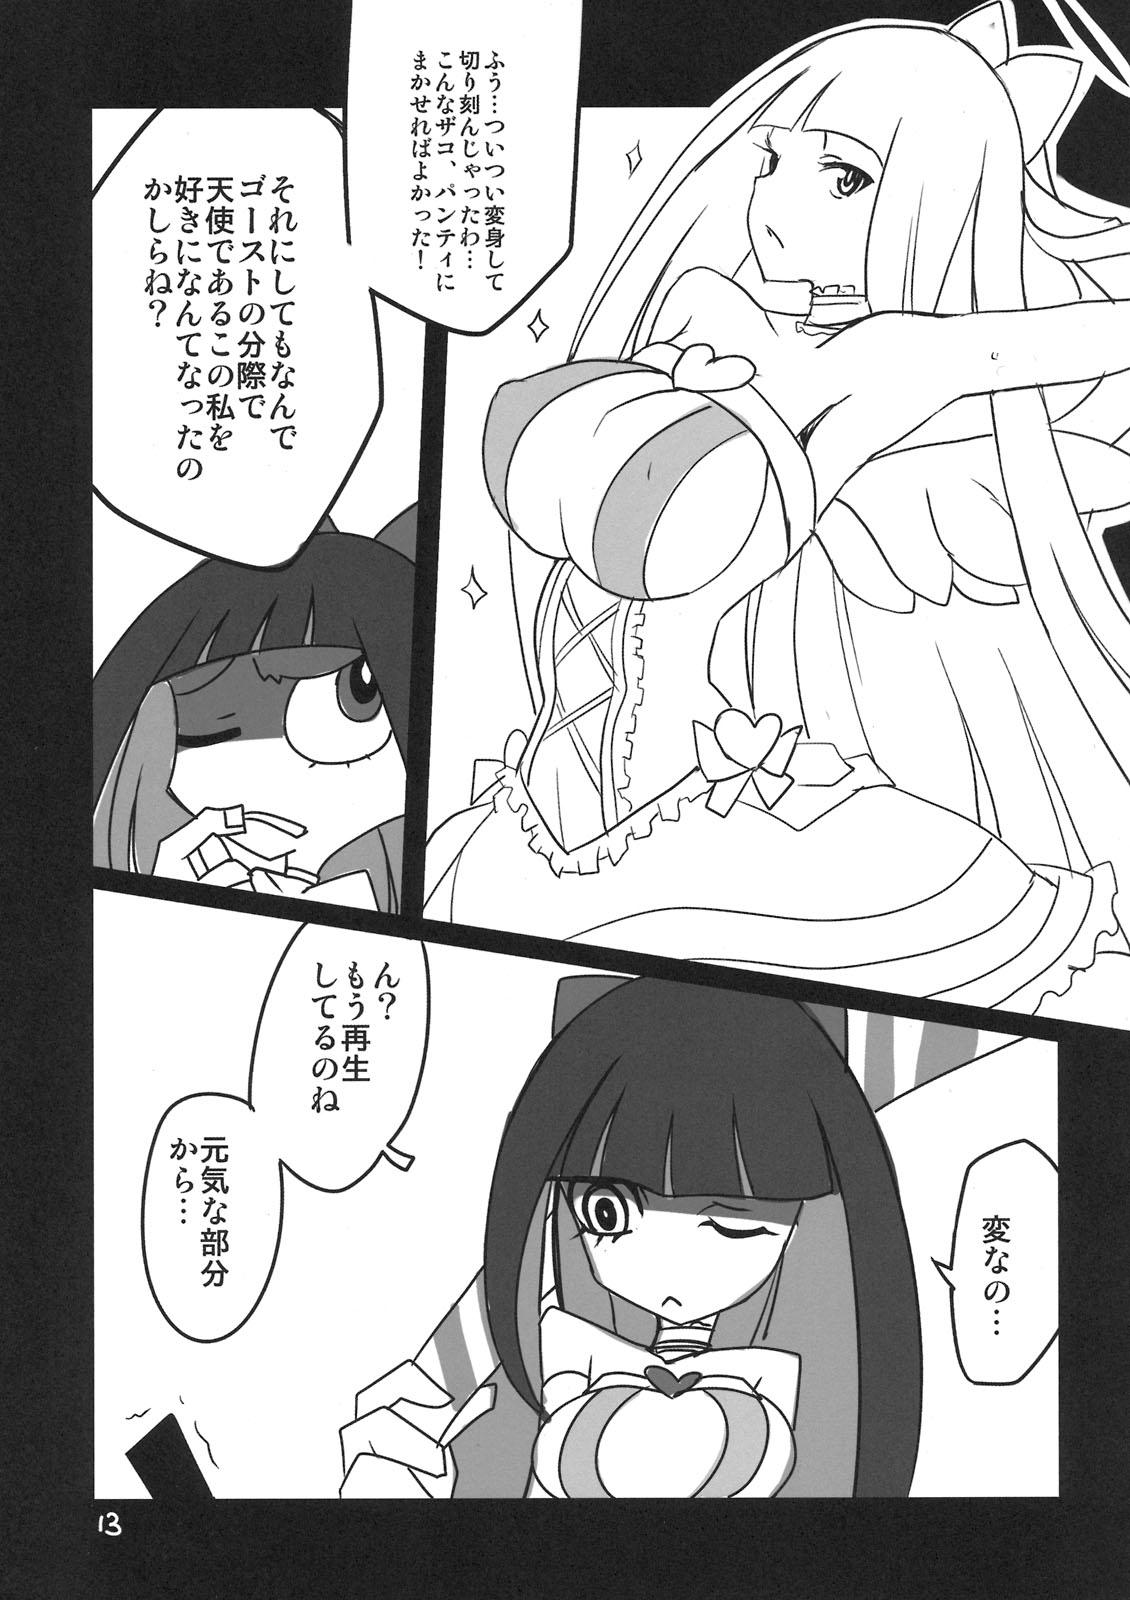 Hot Couple Sex Panty & Stocking Portable - Panty and stocking with garterbelt Jav - Page 13